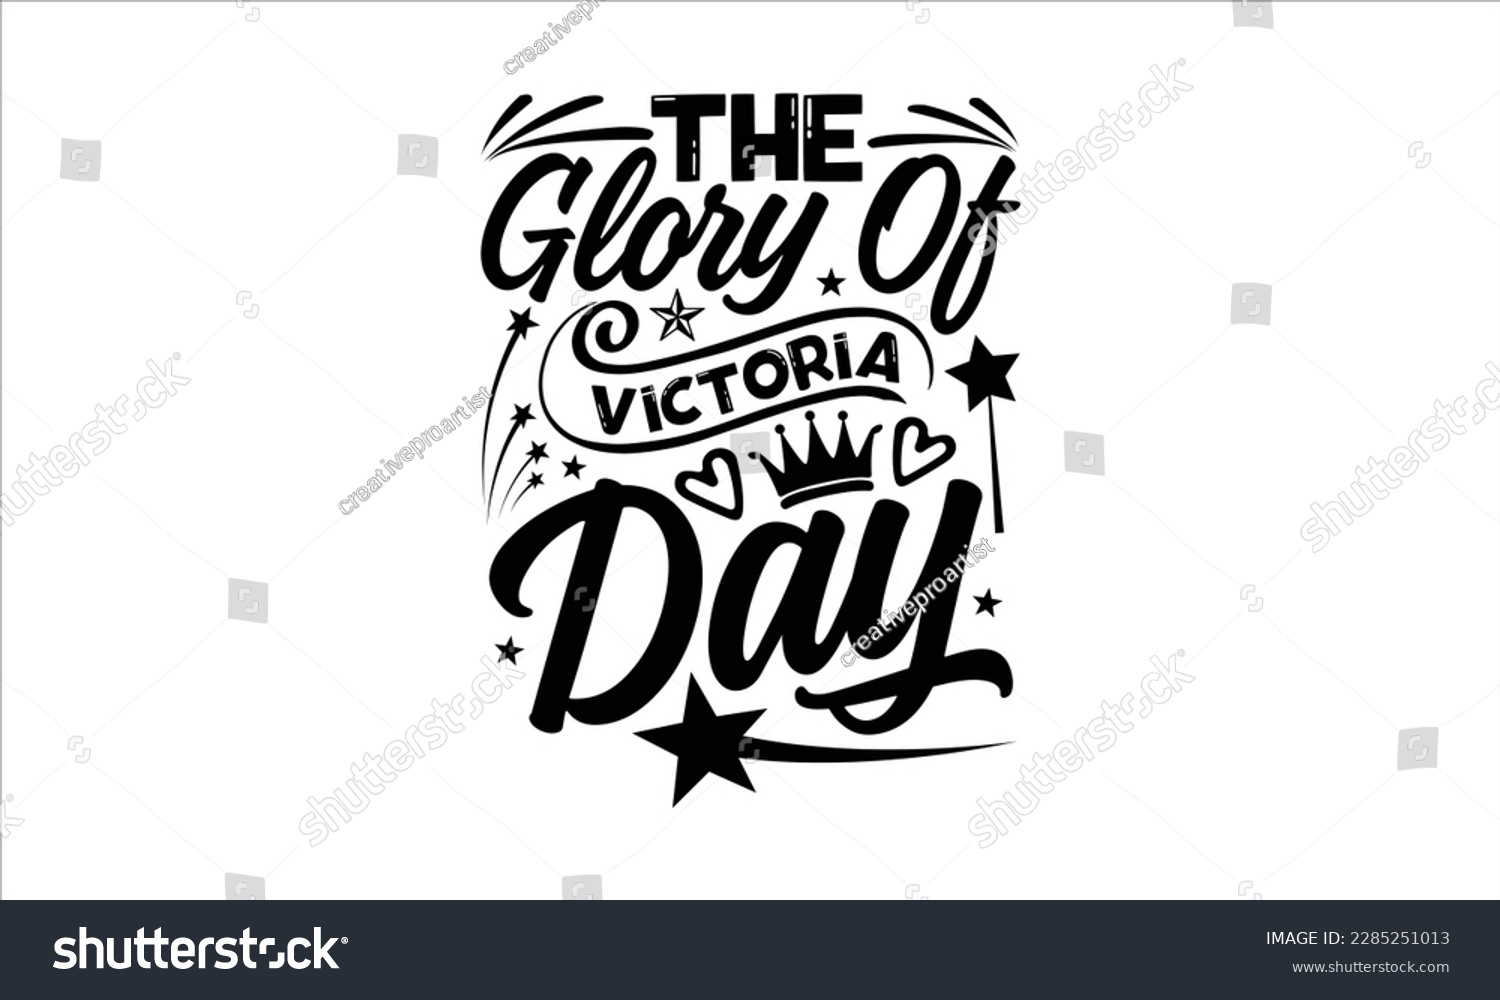 SVG of The Glory of Victoria Day- Victoria Day t- shirt Design, Hand lettering illustration for your design, Modern calligraphy, greeting card template with typography text svg for posters, EPS 10 svg